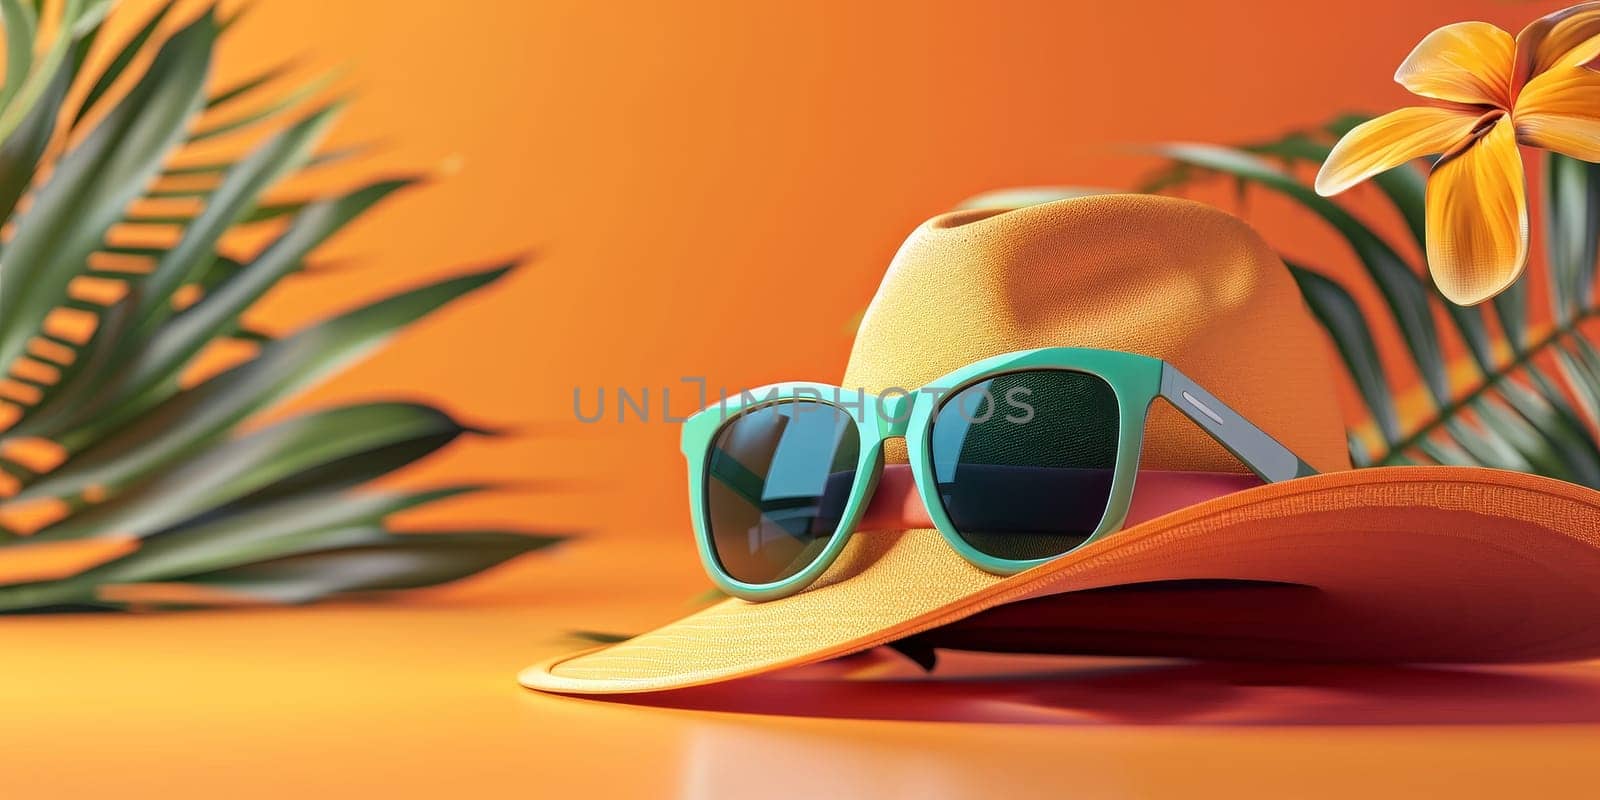 A hat and sunglasses are on a table in front of a leafy green background. Concept of relaxation and leisure, as the hat